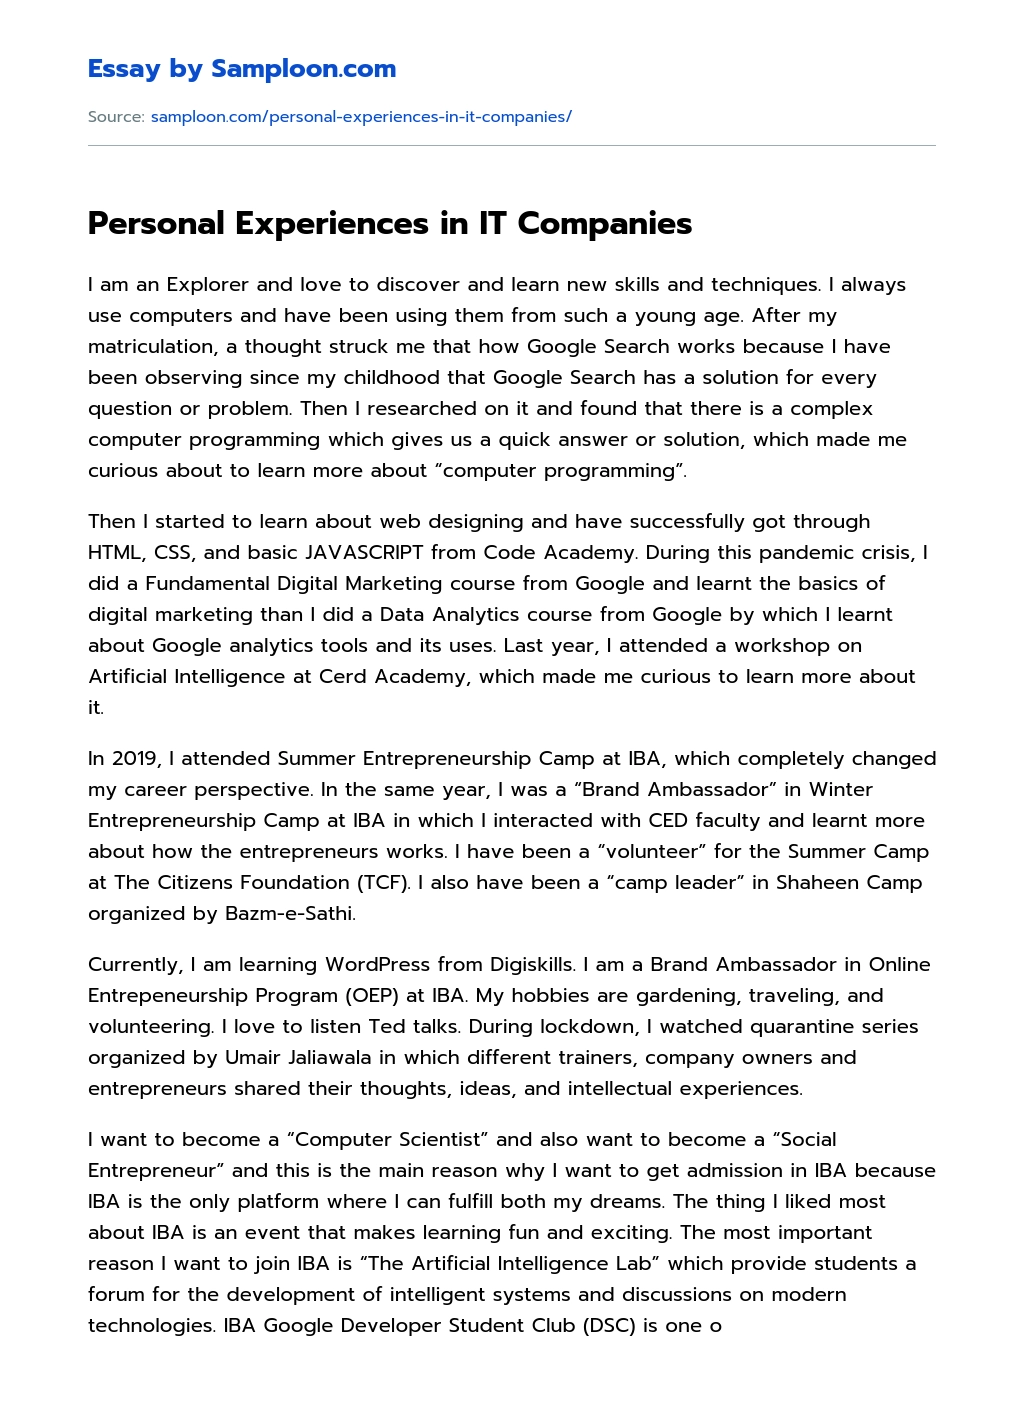 Personal Experiences in IT Companies essay